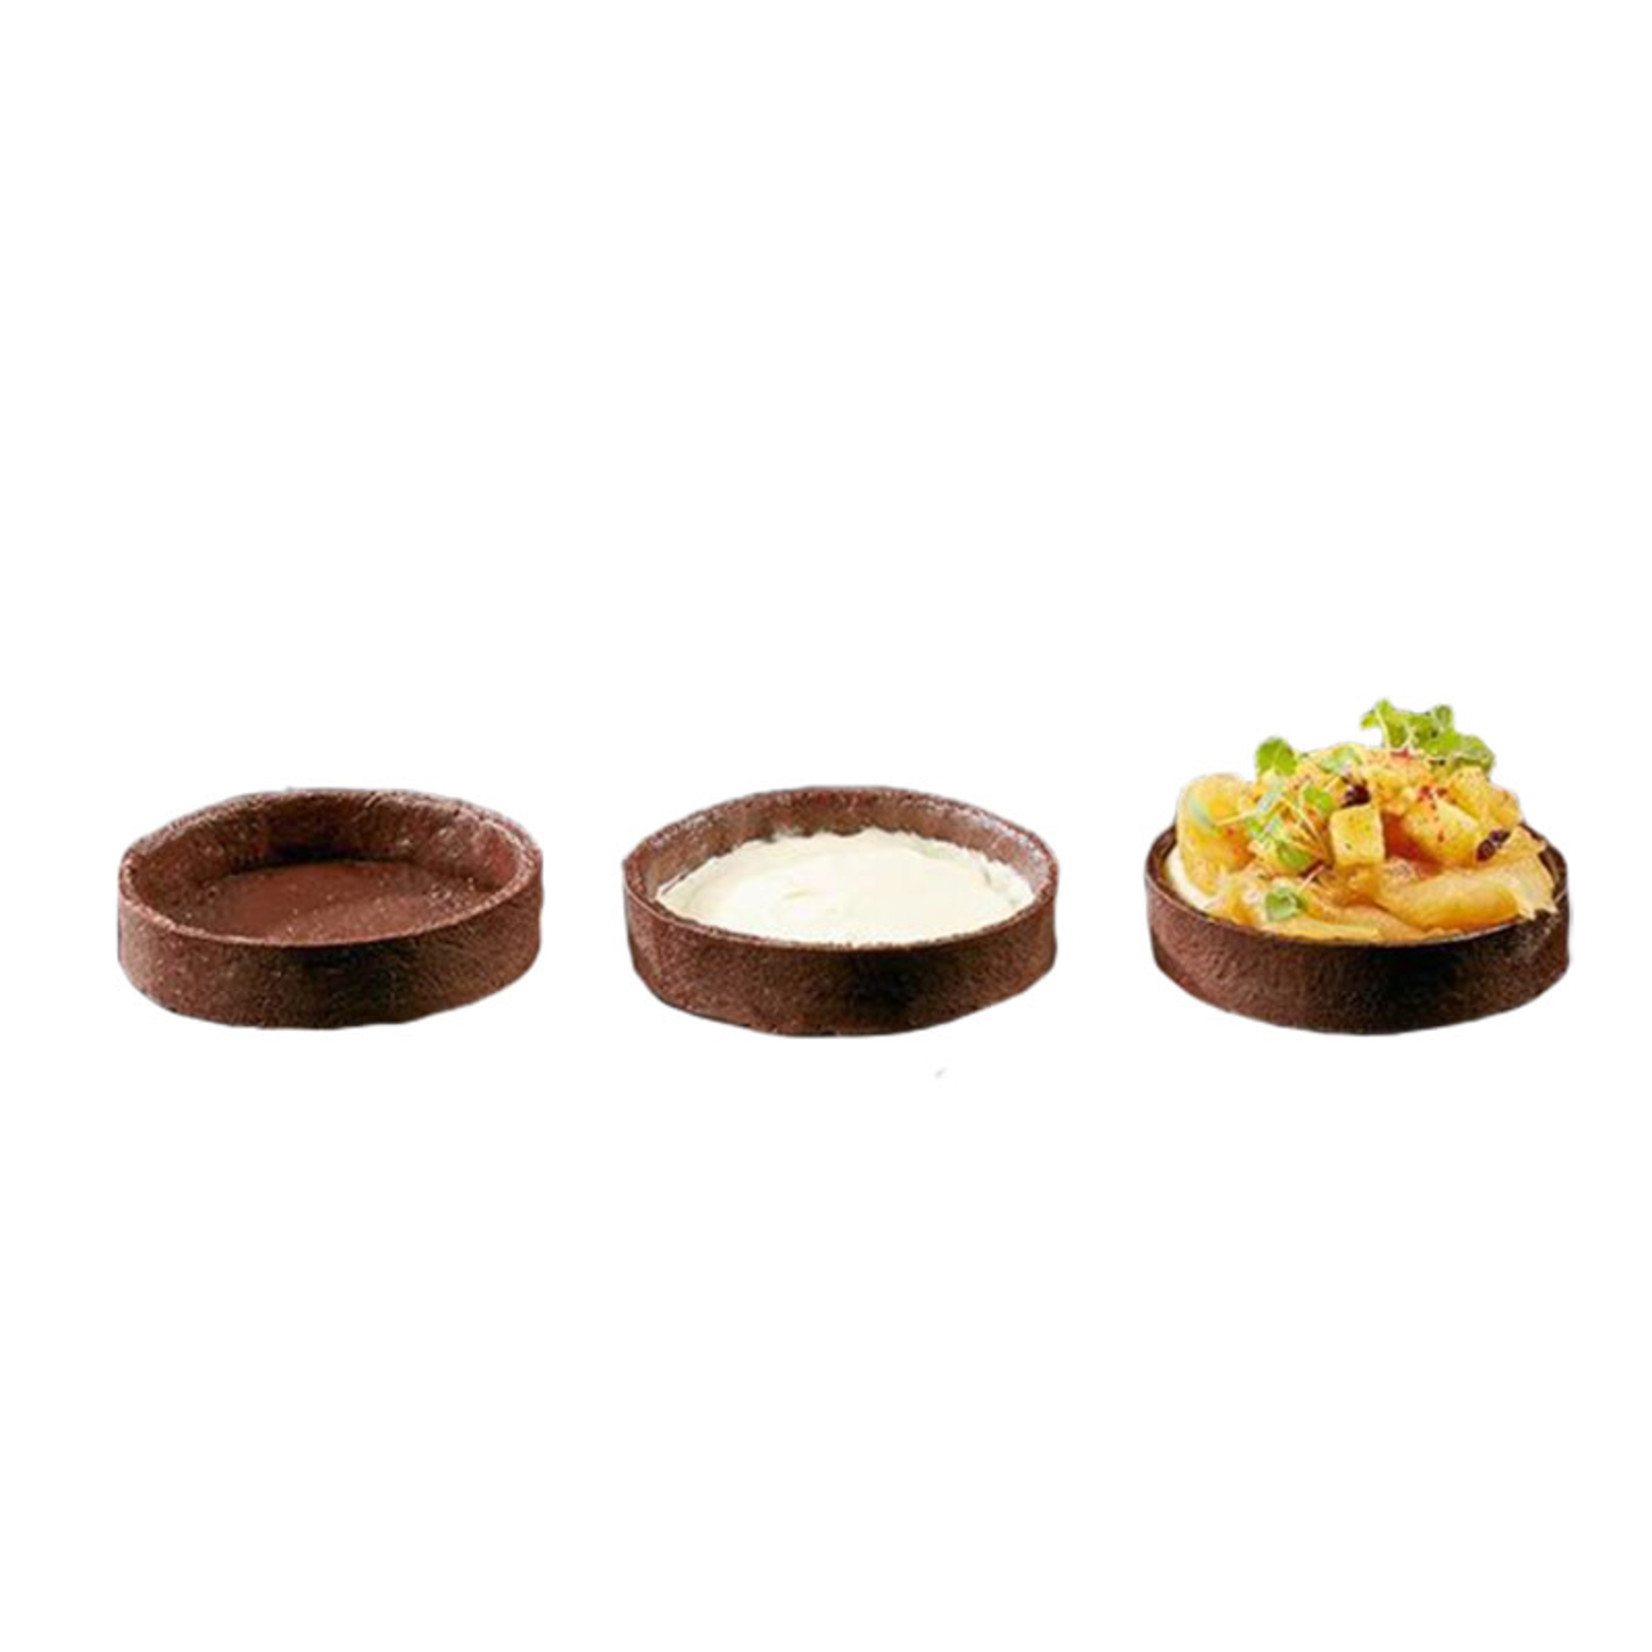 Le Chic Patissier Le Chic Patissier - Tart shell, Chocolate round - 4'' (40ct), 78450